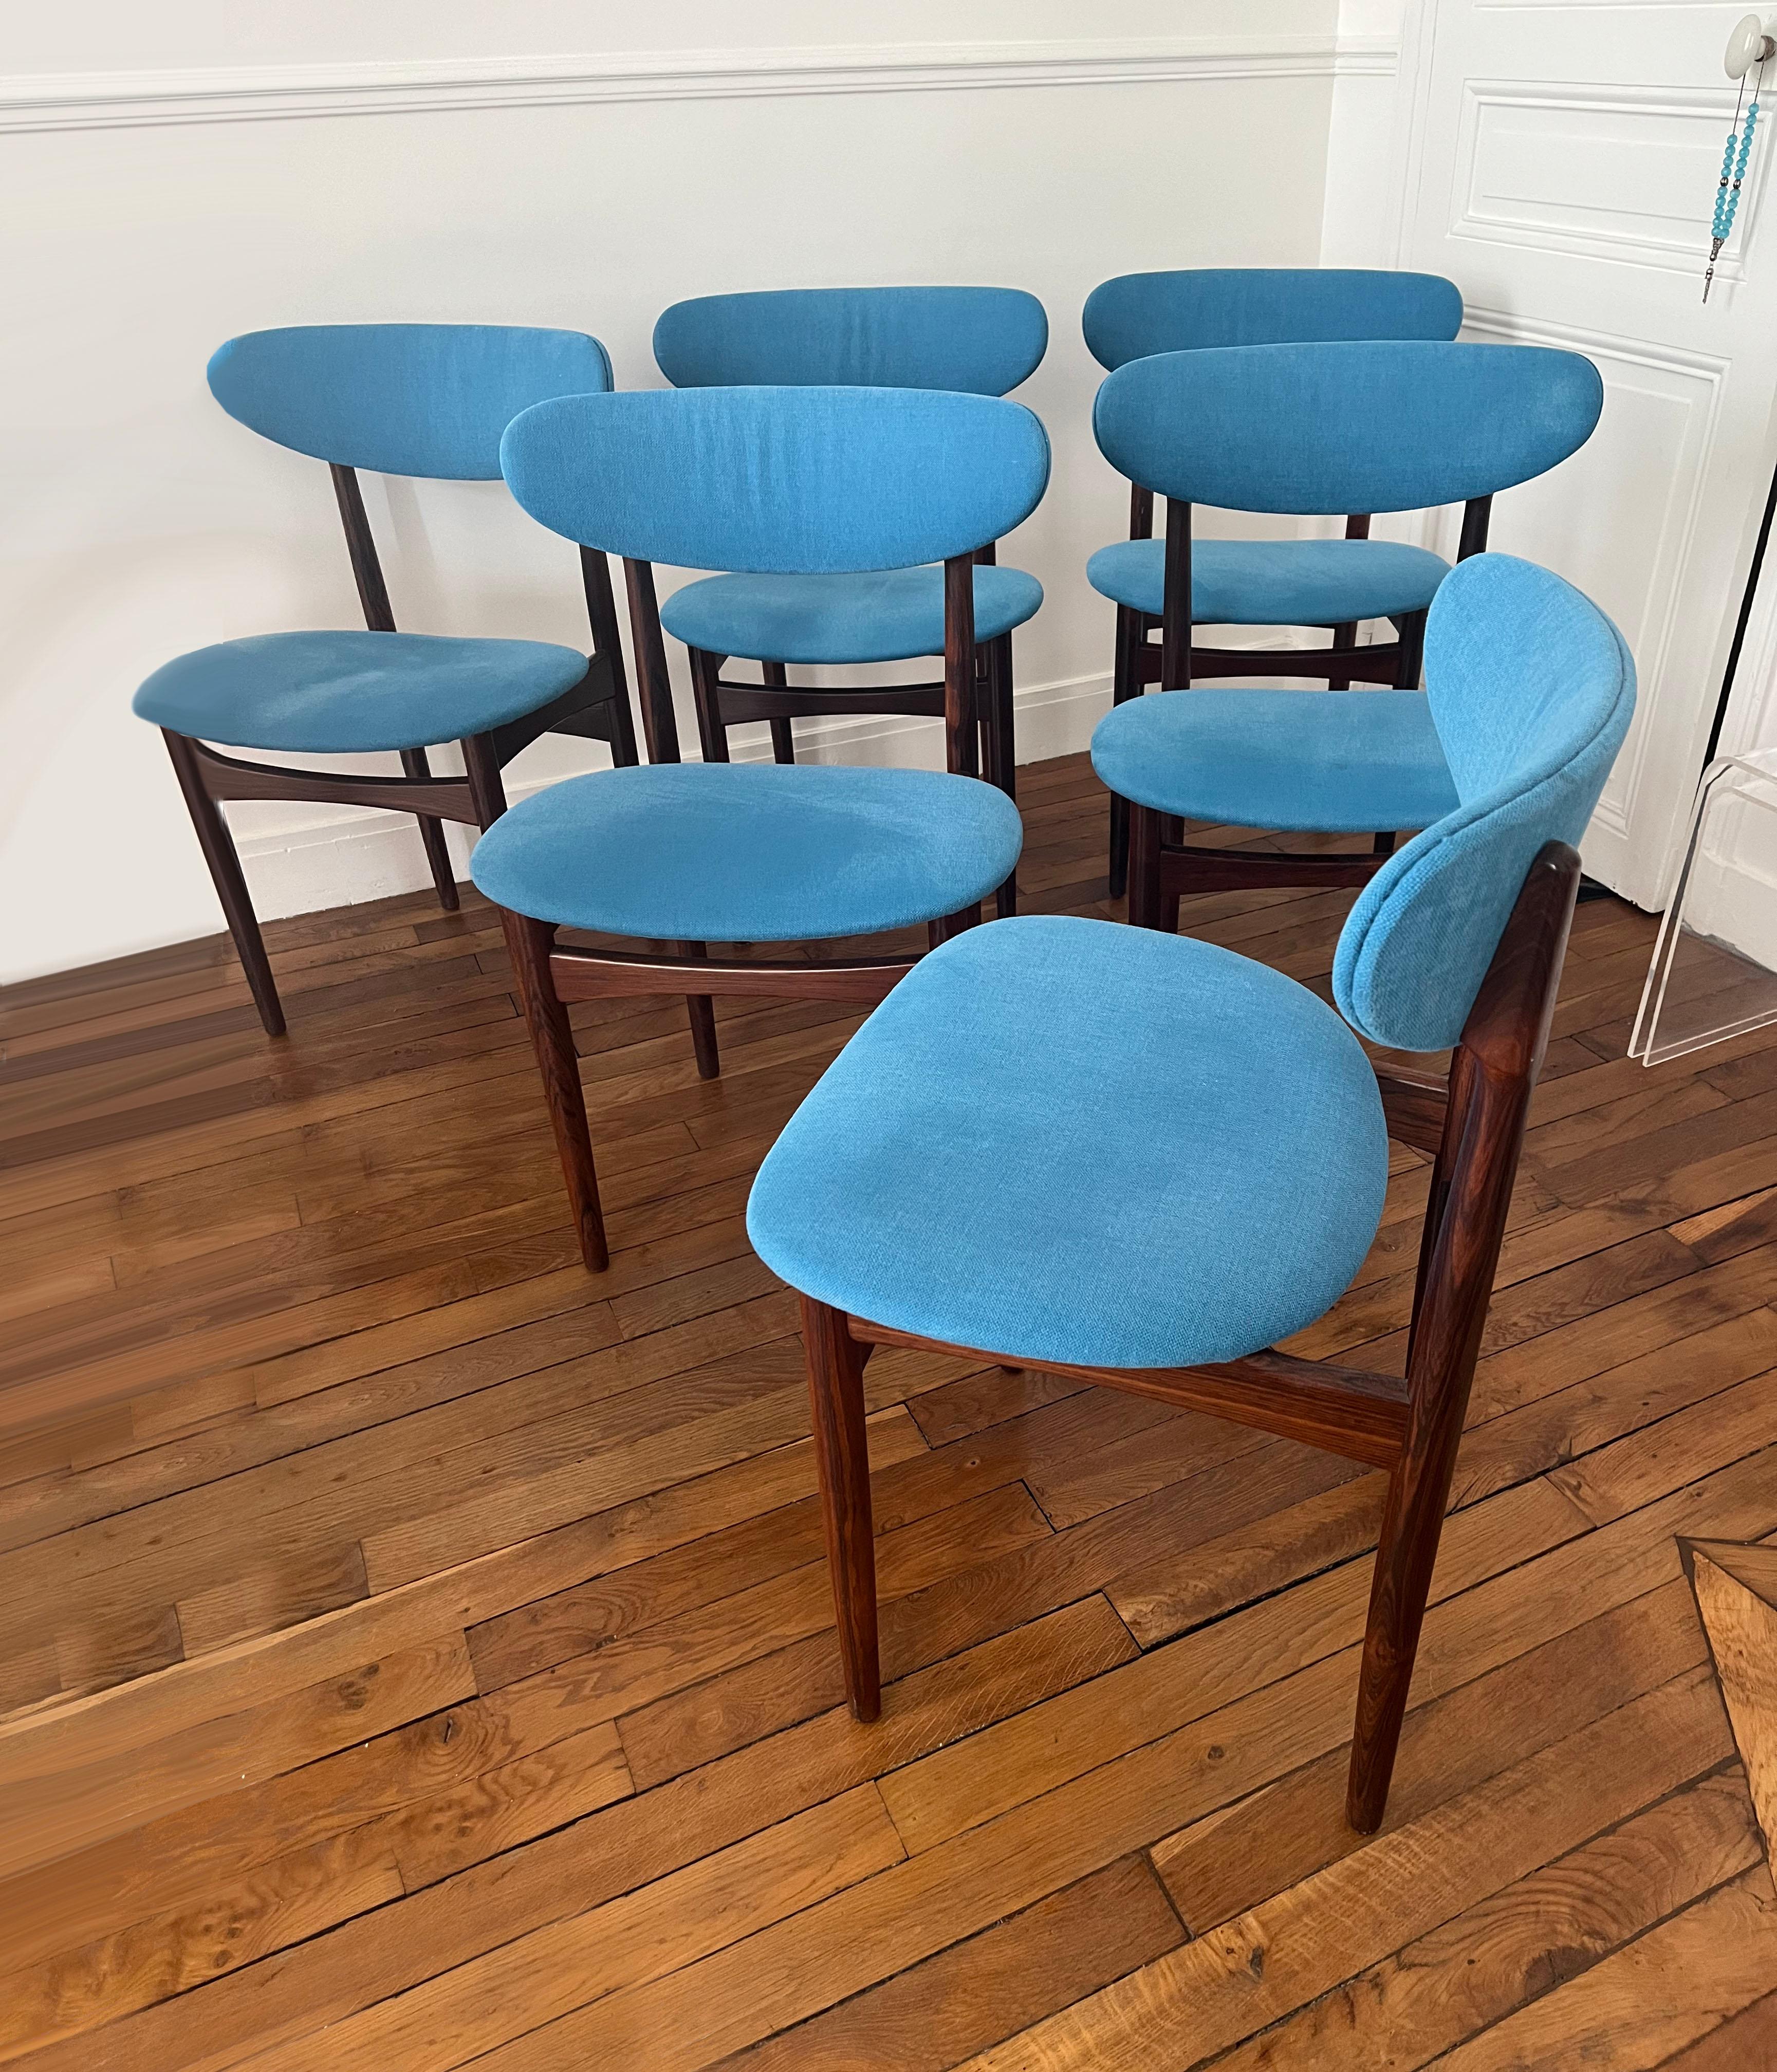 Kofod Larsen 
6 chairs 
Rio rosewood and blue fabric
Circa 1971
H 78 x W 49 x D 41 cms 
Very good condition 
2800 euros